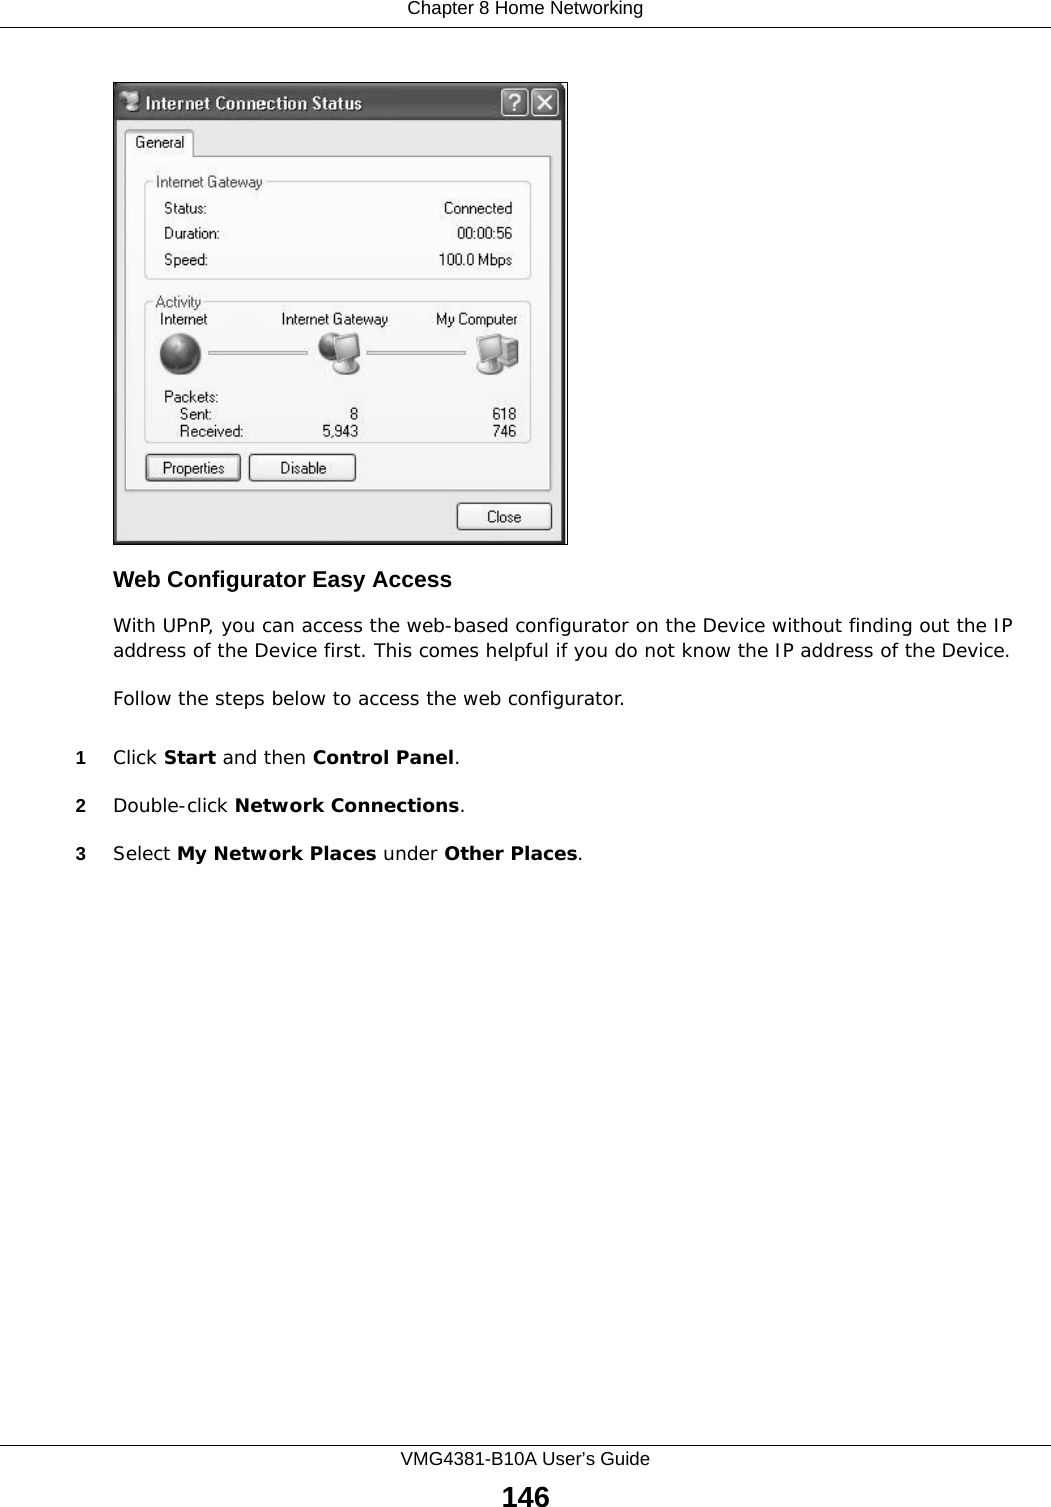 Chapter 8 Home NetworkingVMG4381-B10A User’s Guide146Internet Connection StatusWeb Configurator Easy AccessWith UPnP, you can access the web-based configurator on the Device without finding out the IP address of the Device first. This comes helpful if you do not know the IP address of the Device.Follow the steps below to access the web configurator.1Click Start and then Control Panel. 2Double-click Network Connections. 3Select My Network Places under Other Places. 